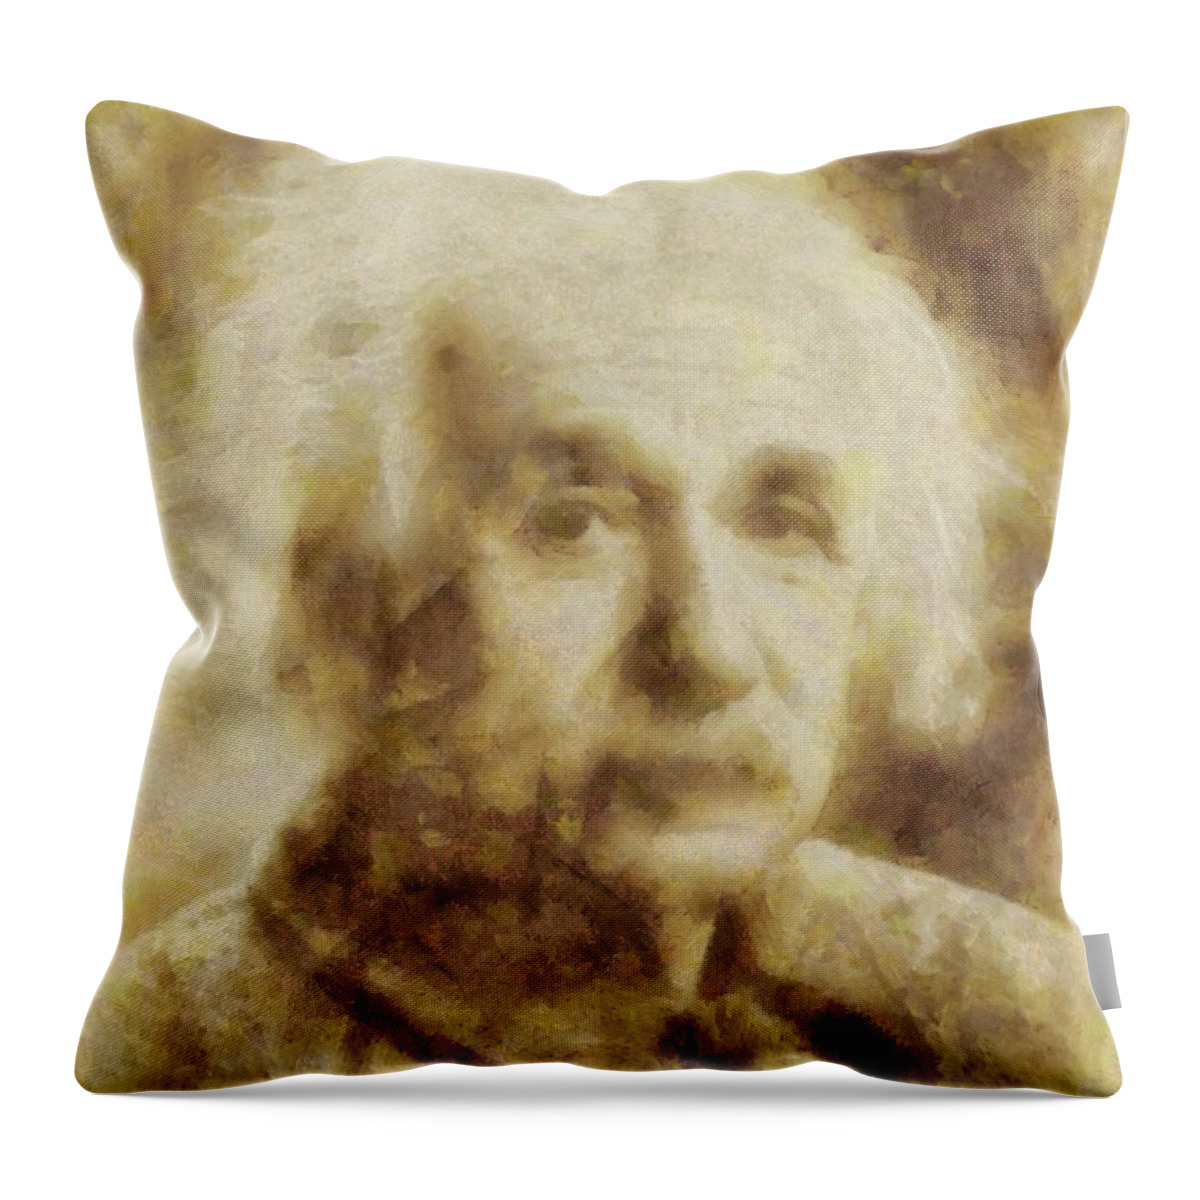 Cinema Throw Pillow featuring the painting Albert Einstein Famous Scientist by Esoterica Art Agency